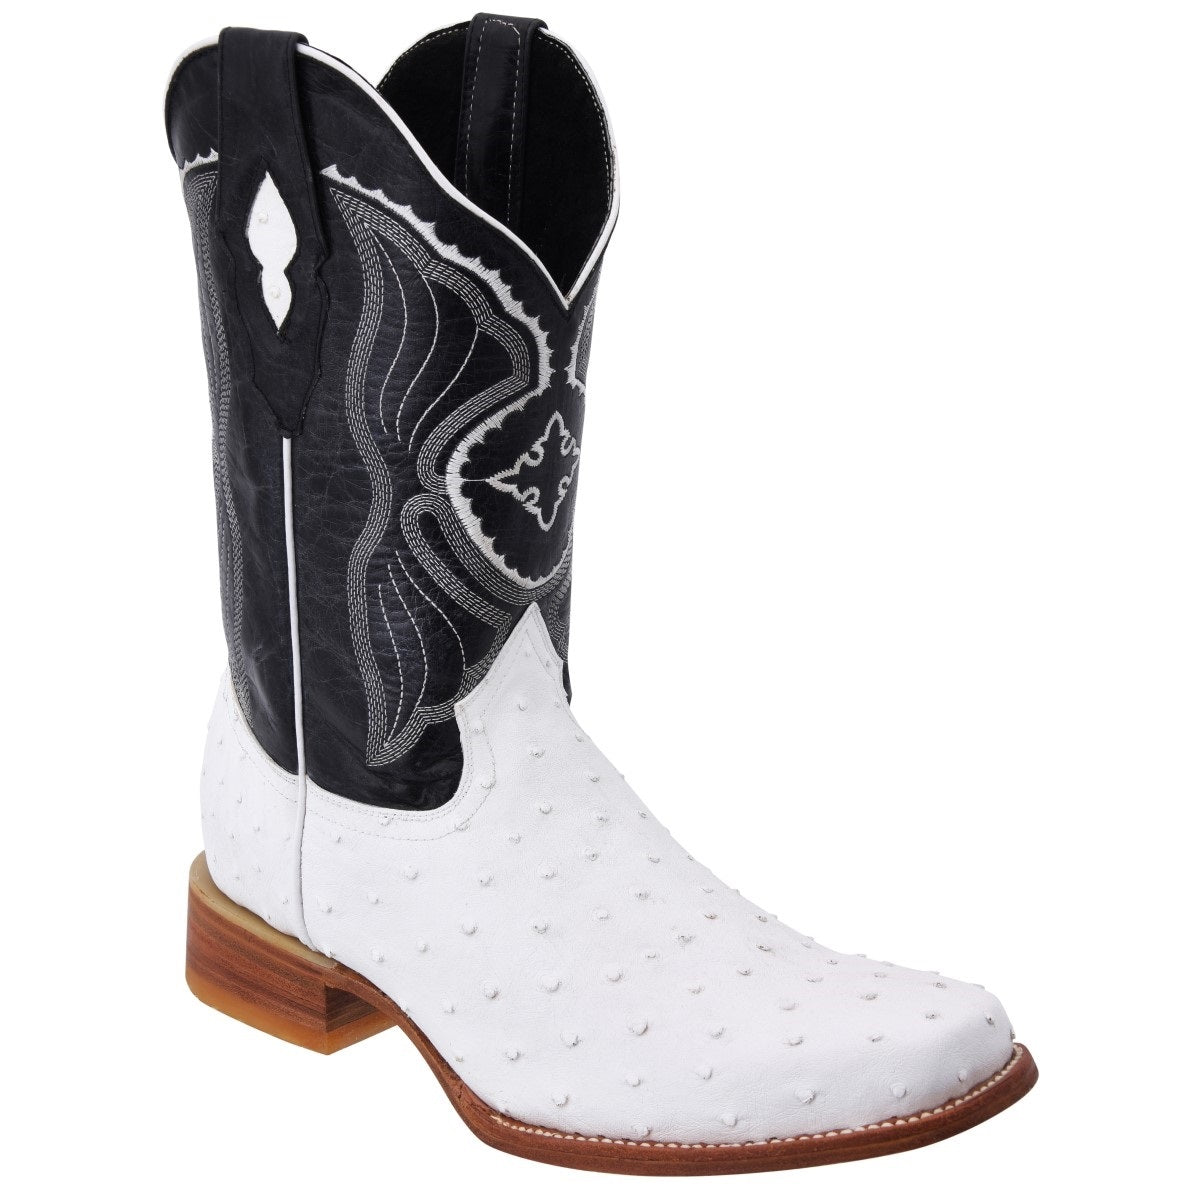 Botas Vaqueras TM-WD0369 Western Boots – Nantli's - Online Store | Footwear, Clothing and Accessories